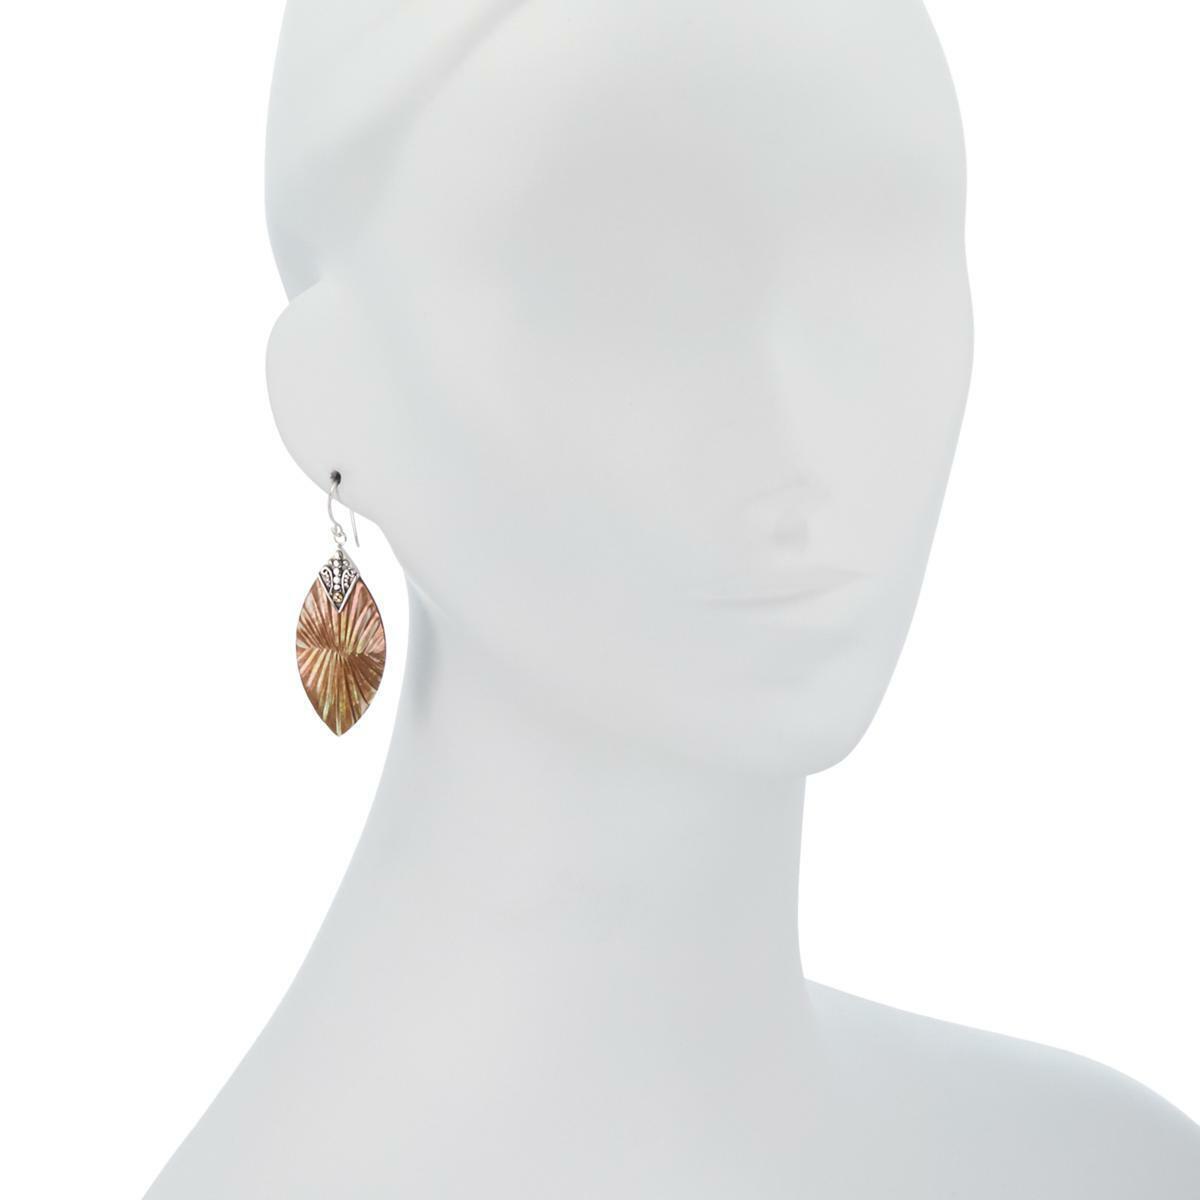 Bali RoManse 2-Tone Carved Mother-of-Pearl Dangle Earrings HSN $50.00